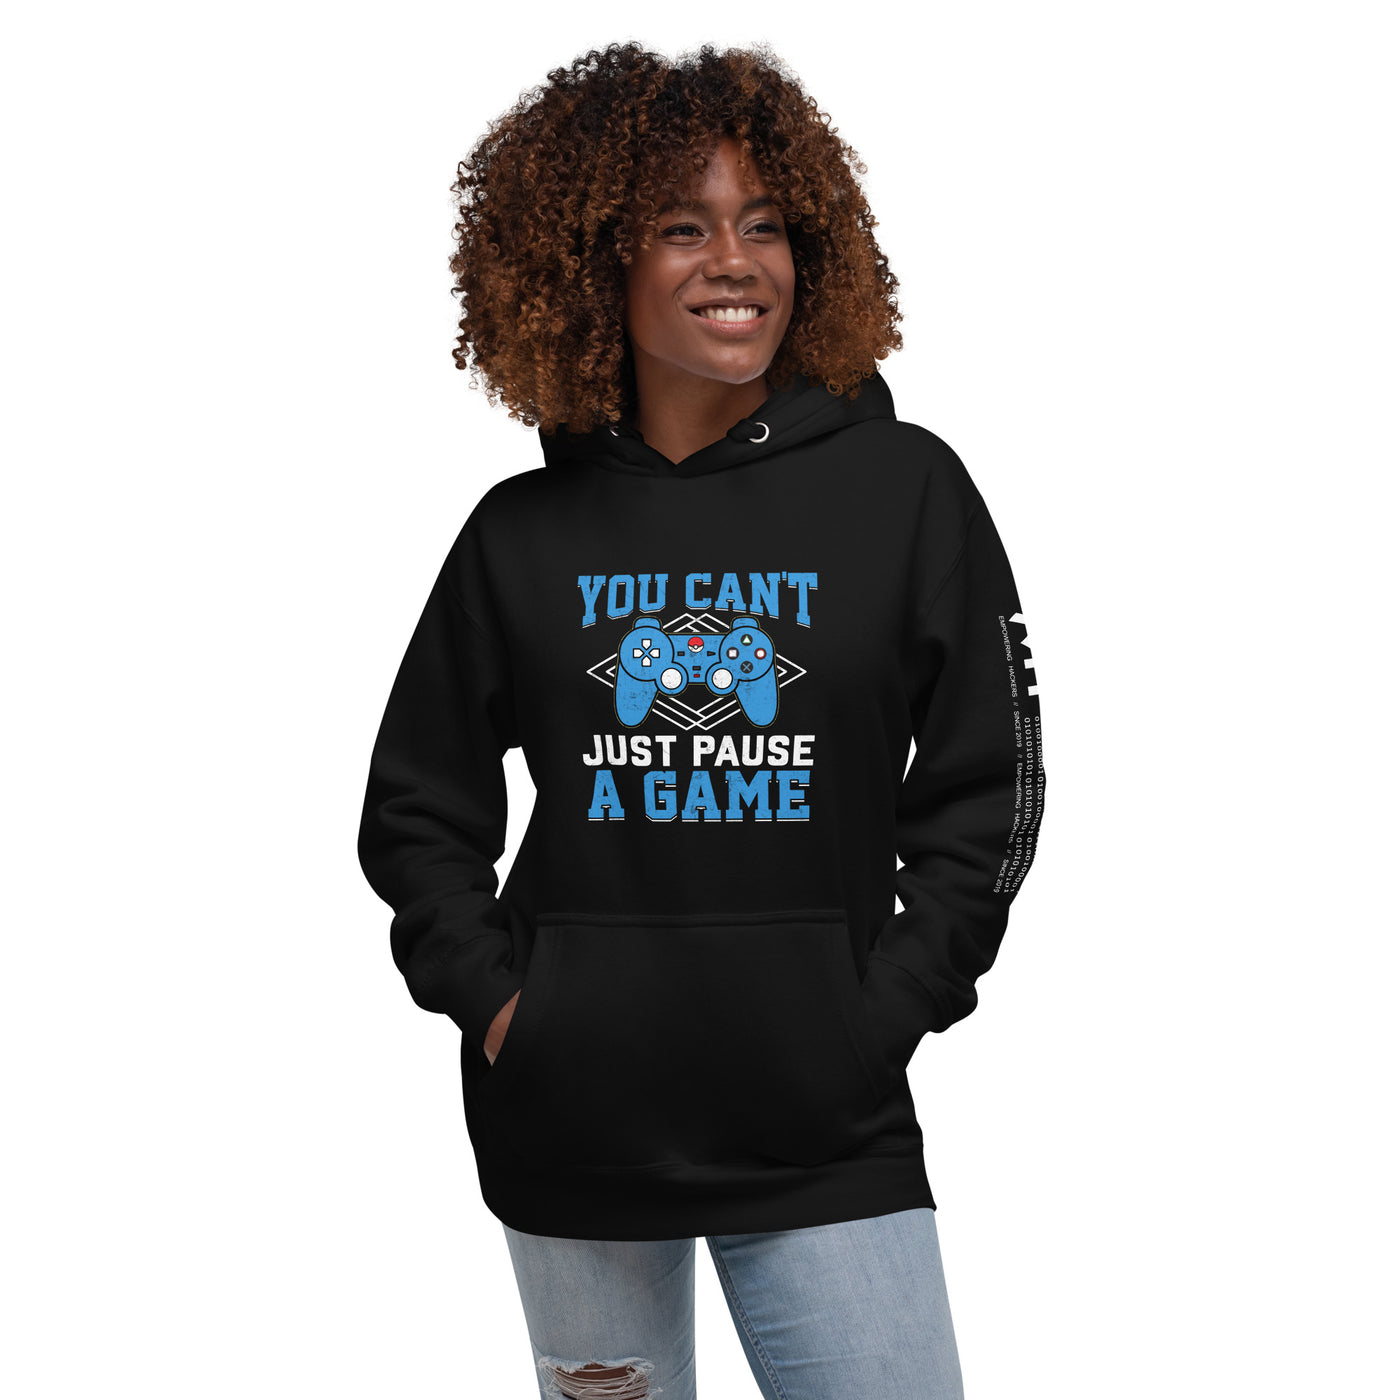 You can't just Pause a Game - Unisex Hoodie